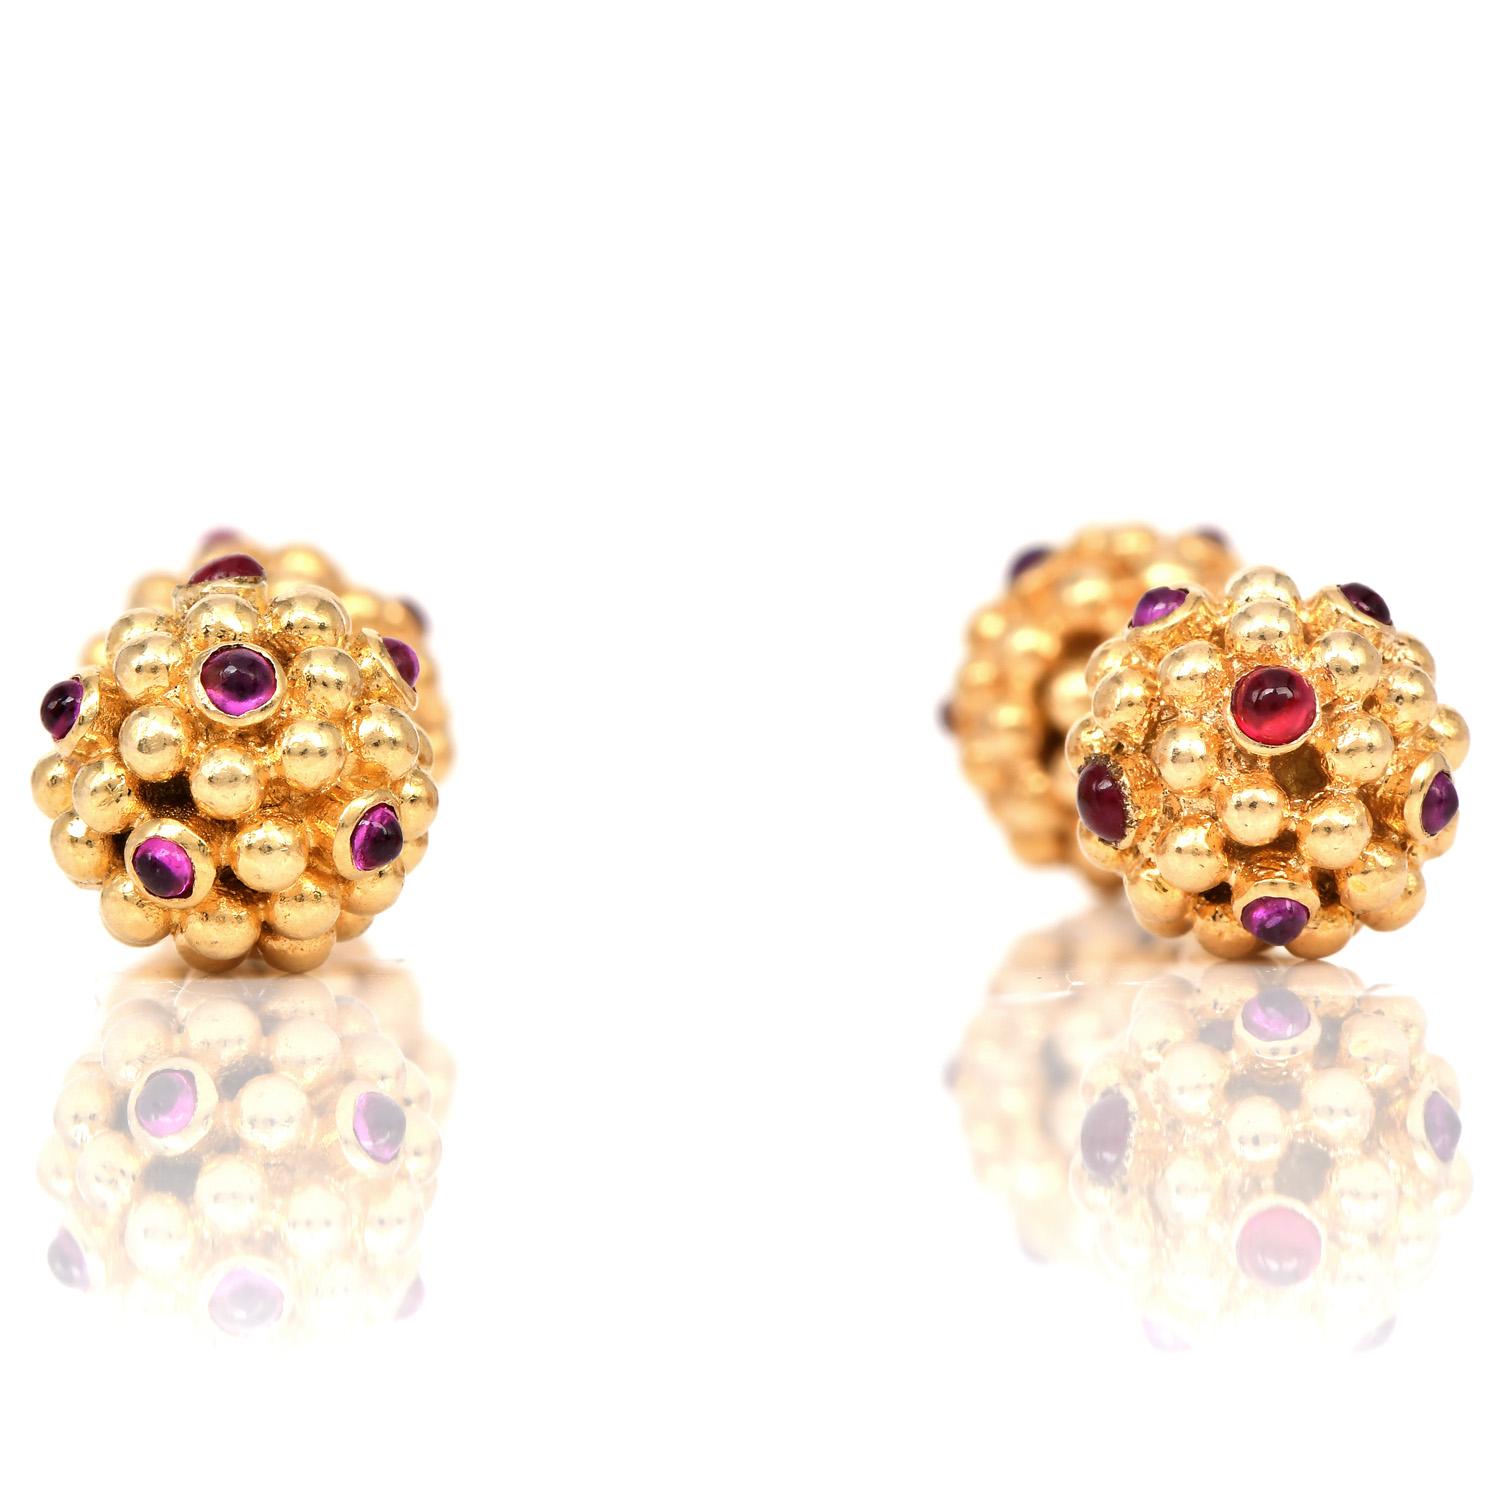 Perfect for any occasion with these Unisex VCA NY vintage 

14K gold round beads sphere cufflink.

 24 cabochons Round cut genuine rubies Adorning these Van Cleef & Arpels cuff links, bezel set, weighing approx 0.80 carats connected bt a link